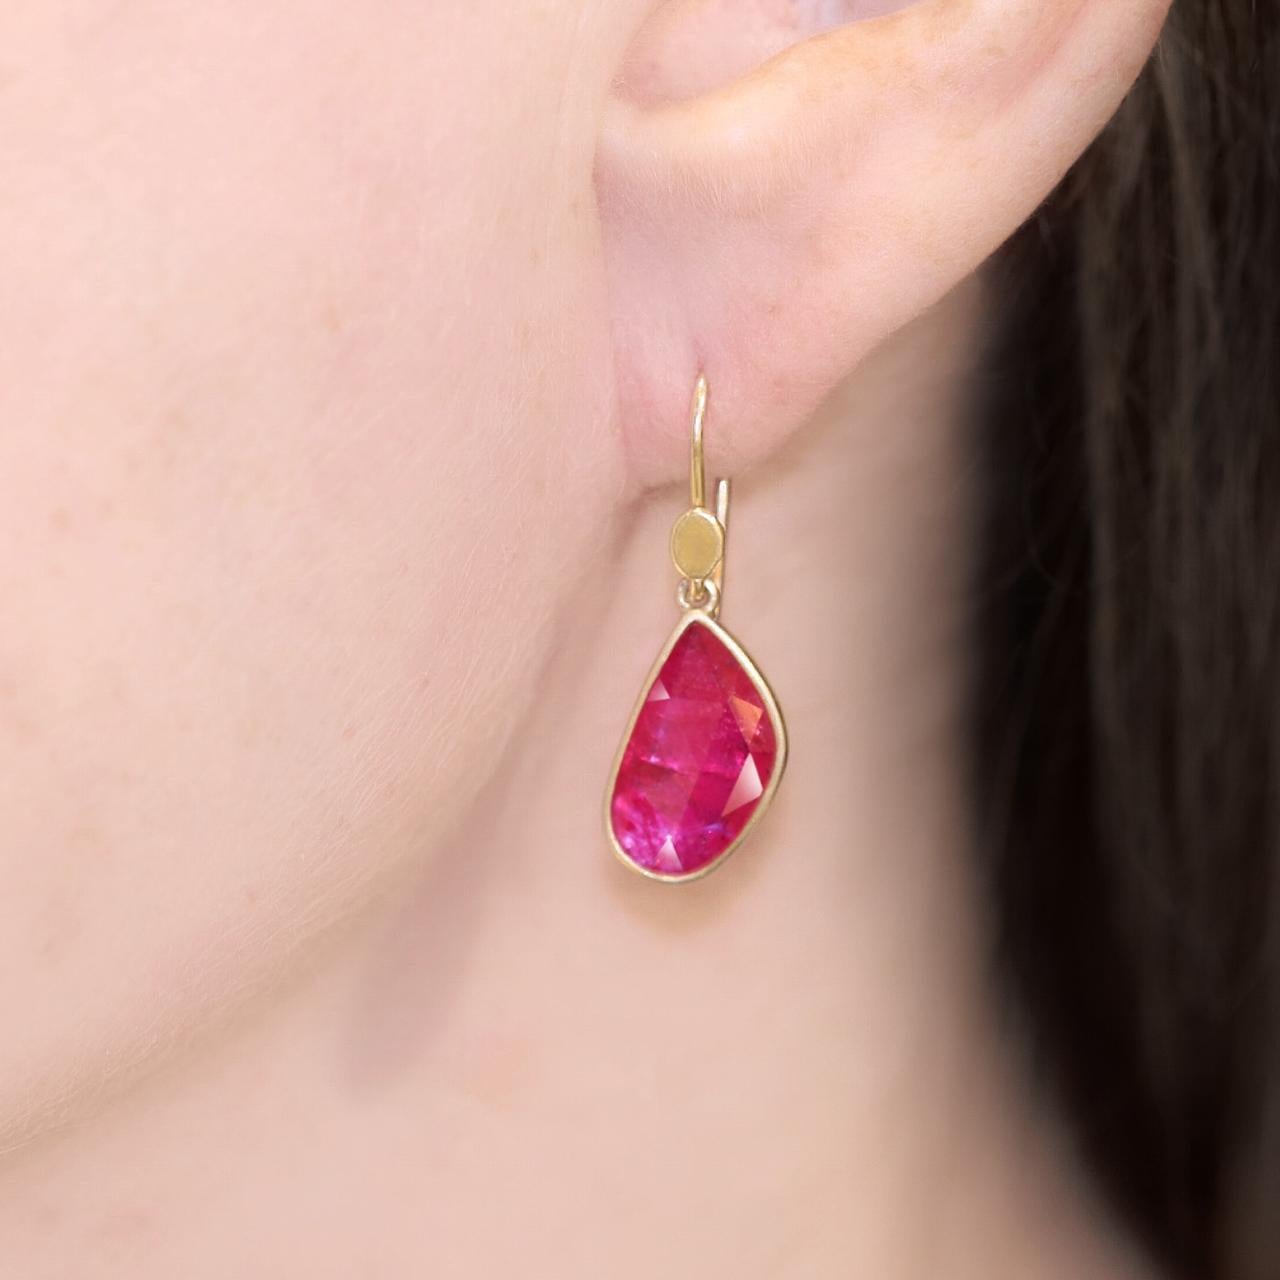 Drop Earrings hand-fabricated by jewelry maker Lola Brooks in signature-finished 18k yellow gold featuring a spectacular matched pair of shimmering rose-cut hot pink rubies totaling 4.31 carats. Stamped and Hallmarked.

About the Maker - Lola Brooks